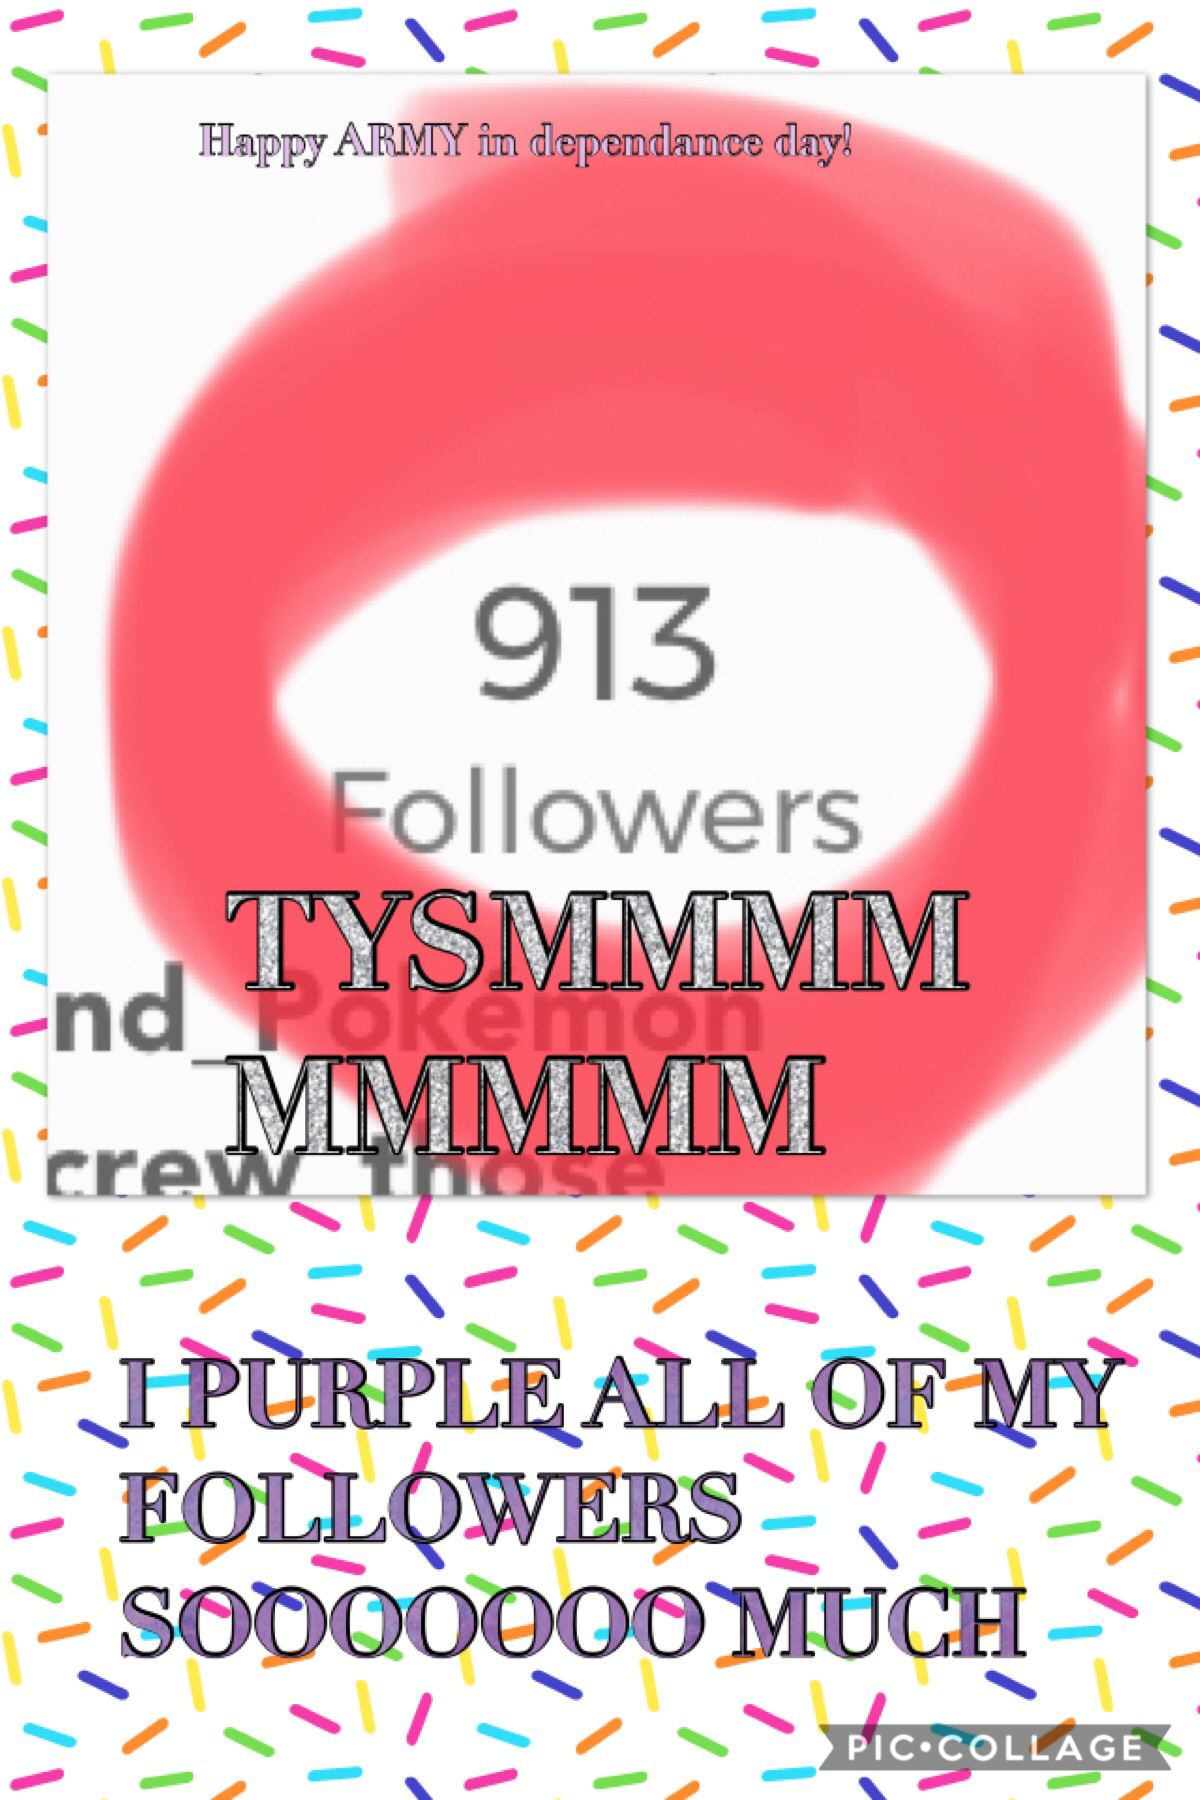 TYSM FOR GETTING ME TO 900 FOLLOWERS! I CANT EXPLAIN IN WORDS HOW GREAT FULL I AM TO HAVE REACHED THIS GOAL! I PURPLE YOU AND HAPPU ARMY I DEPENDANCE DAY EVERYBODY 💜💜💜💜💜💜💜💜💜💜💜💜💜💜💜💜💜💜💜💜💜